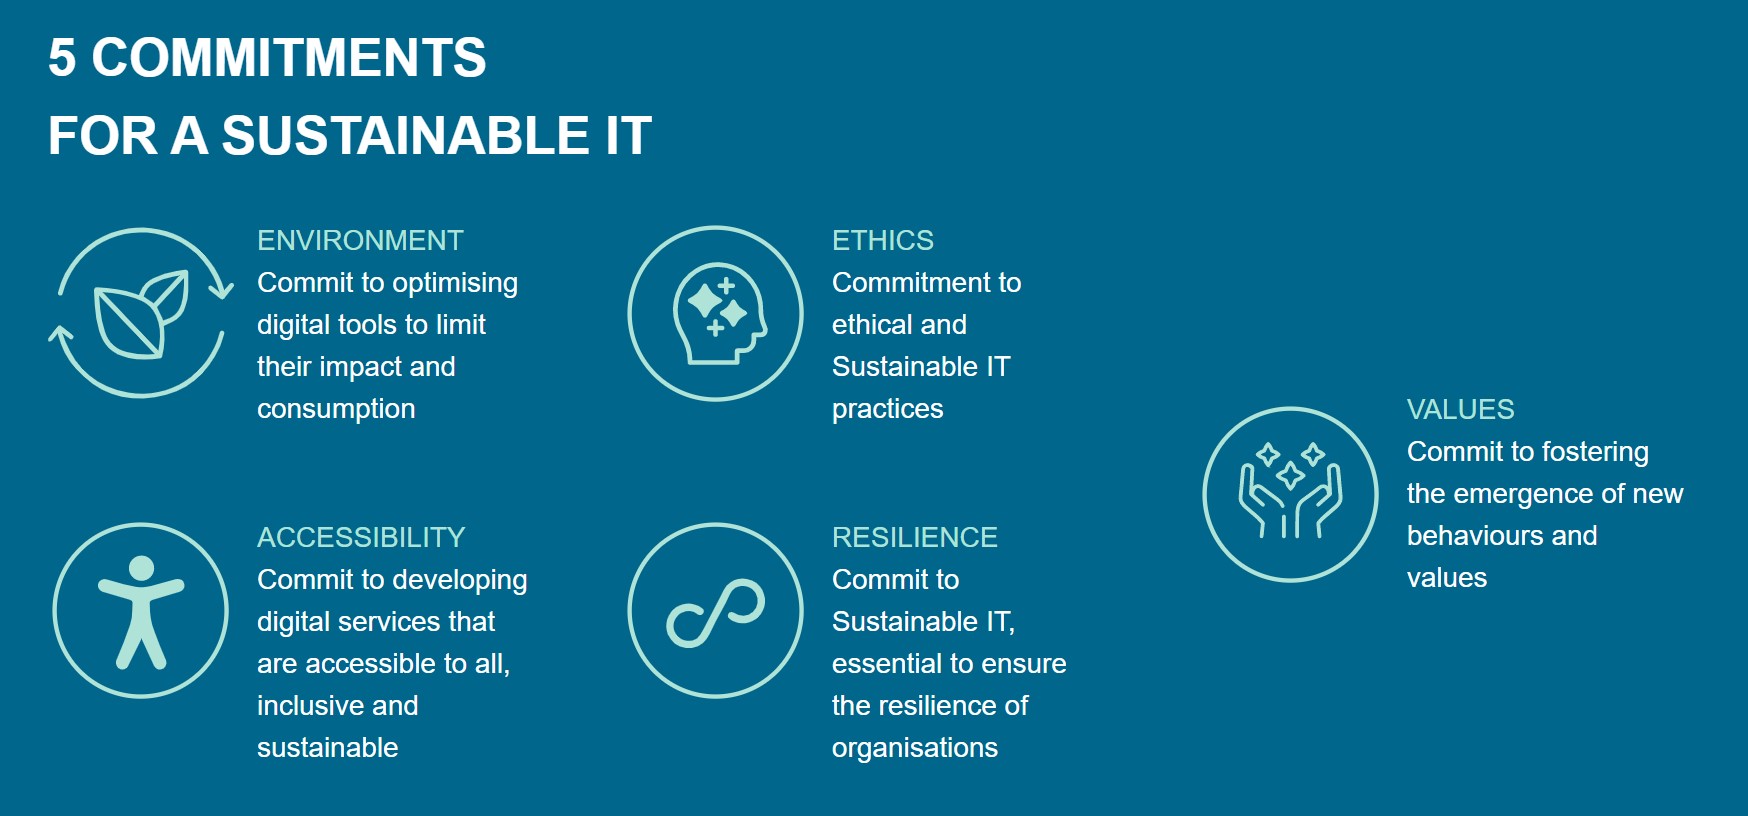 the 5 comitments of the sustainable it charter